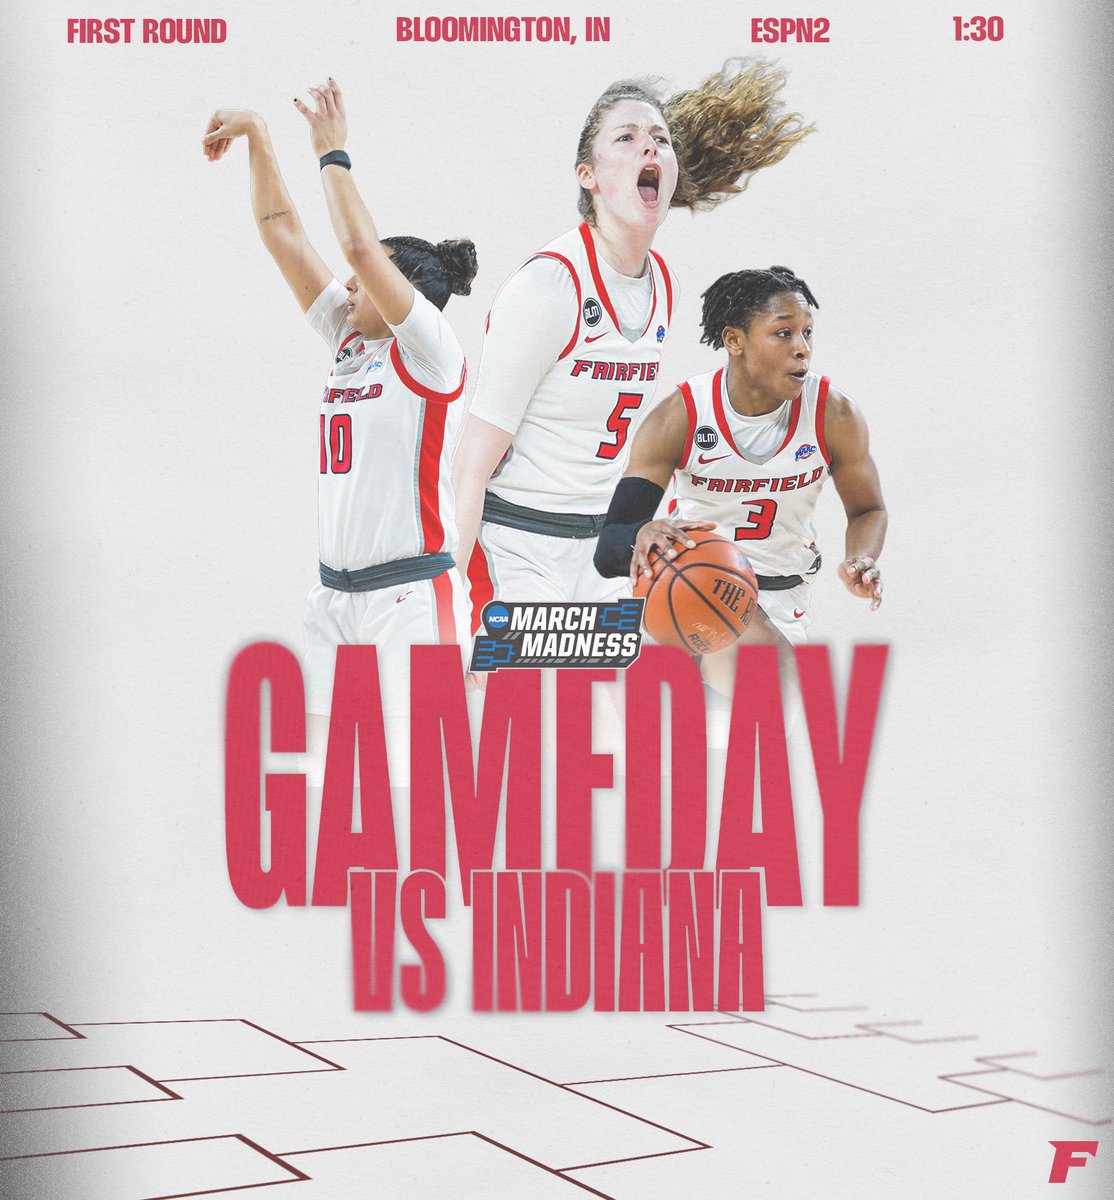 Our time.   🆚 Indiana 🏟️ Assembly Hall ⏰ 1:30 PM 📺 #ESPN2 📊 ncaa.com/game/6284770 #WeAreStags 🤘🏀